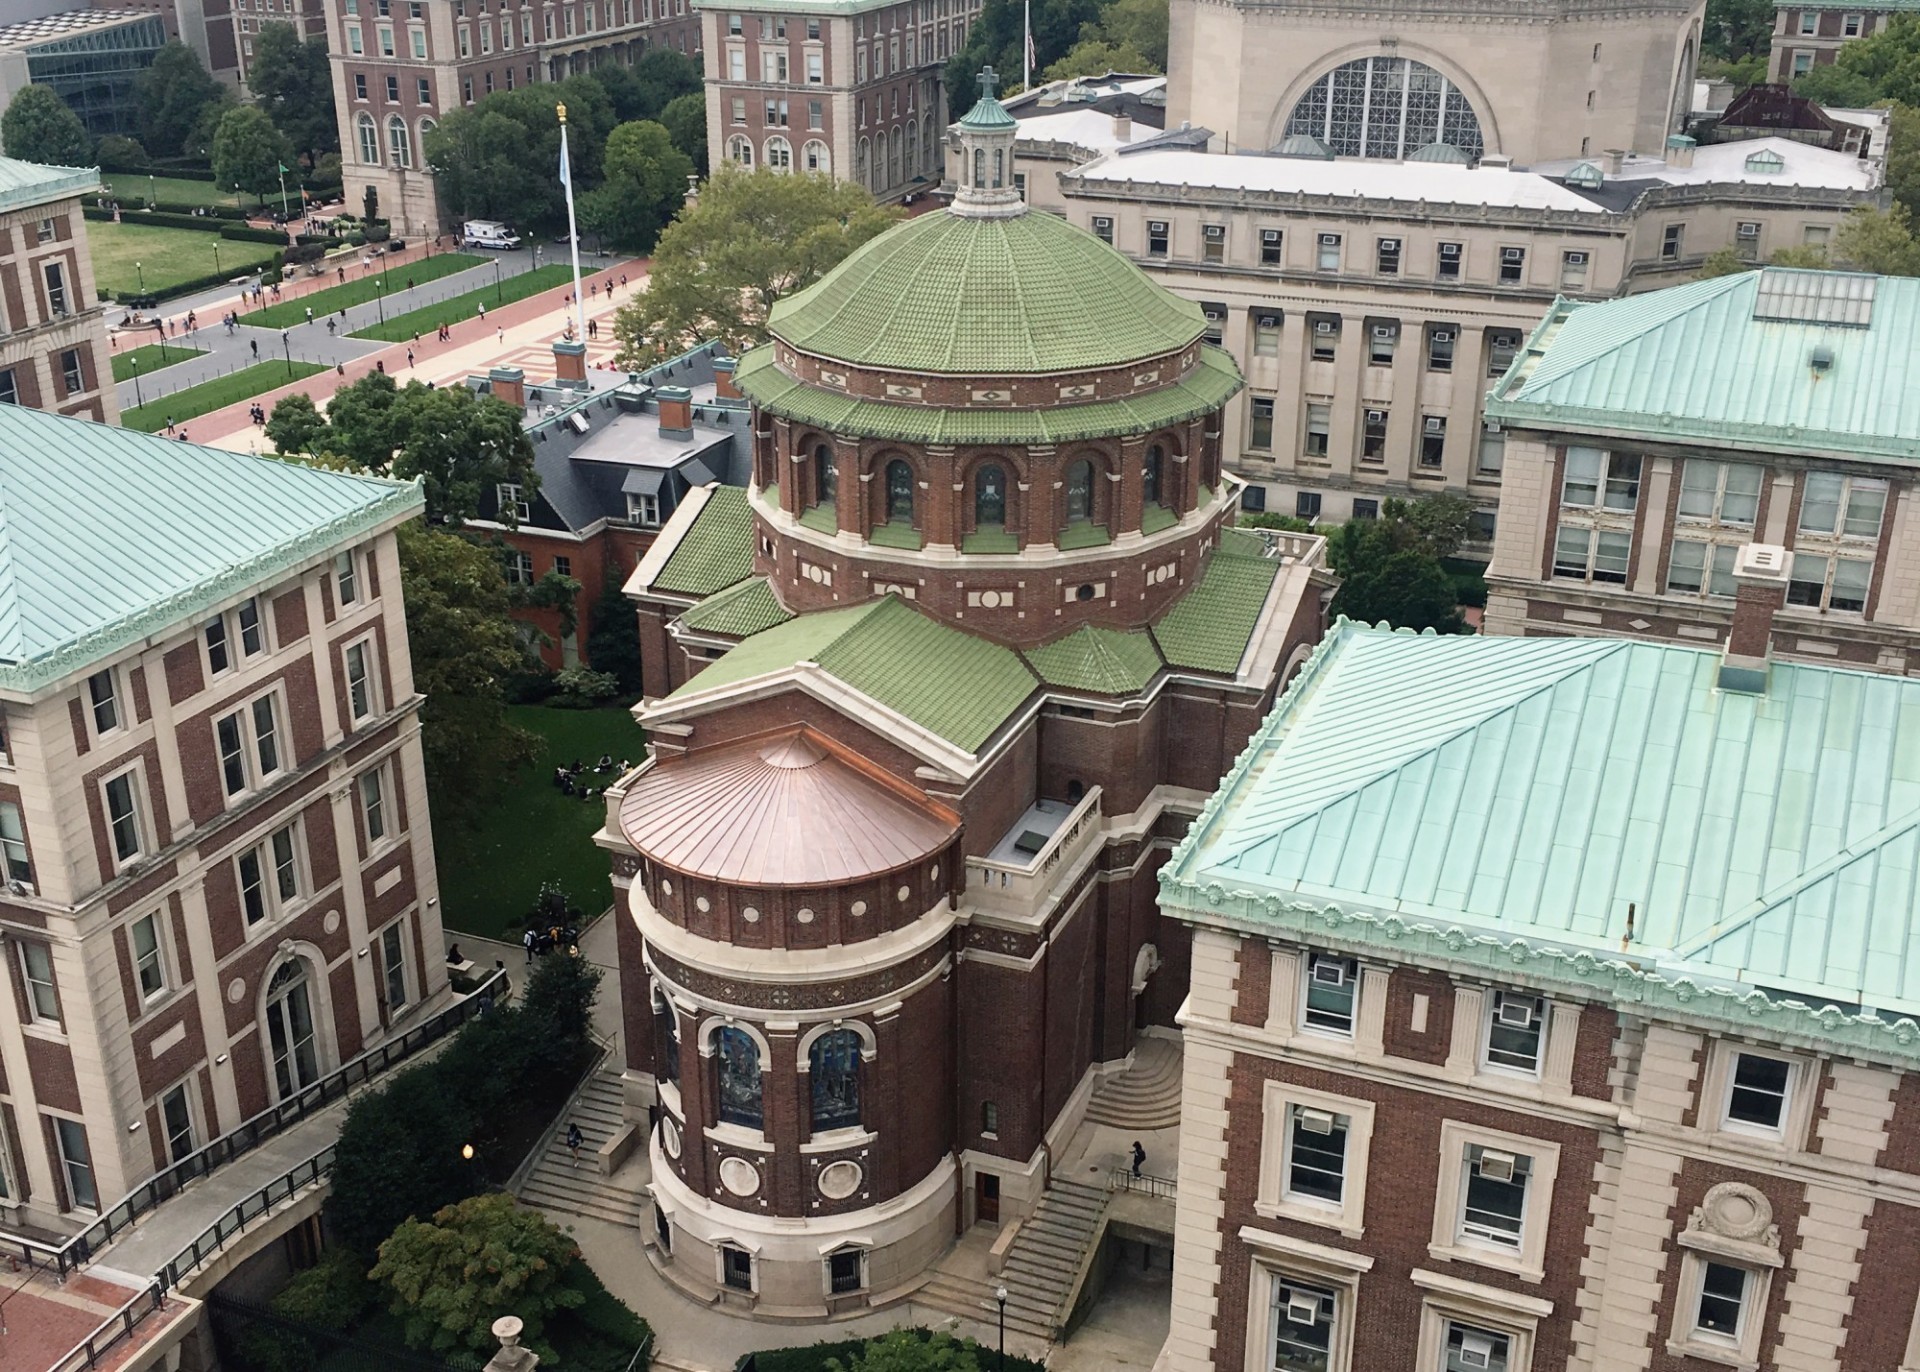 An aerial shot of St. Paul's Chapel with the completed roof replacement, with the apse copper roof facing the camera.